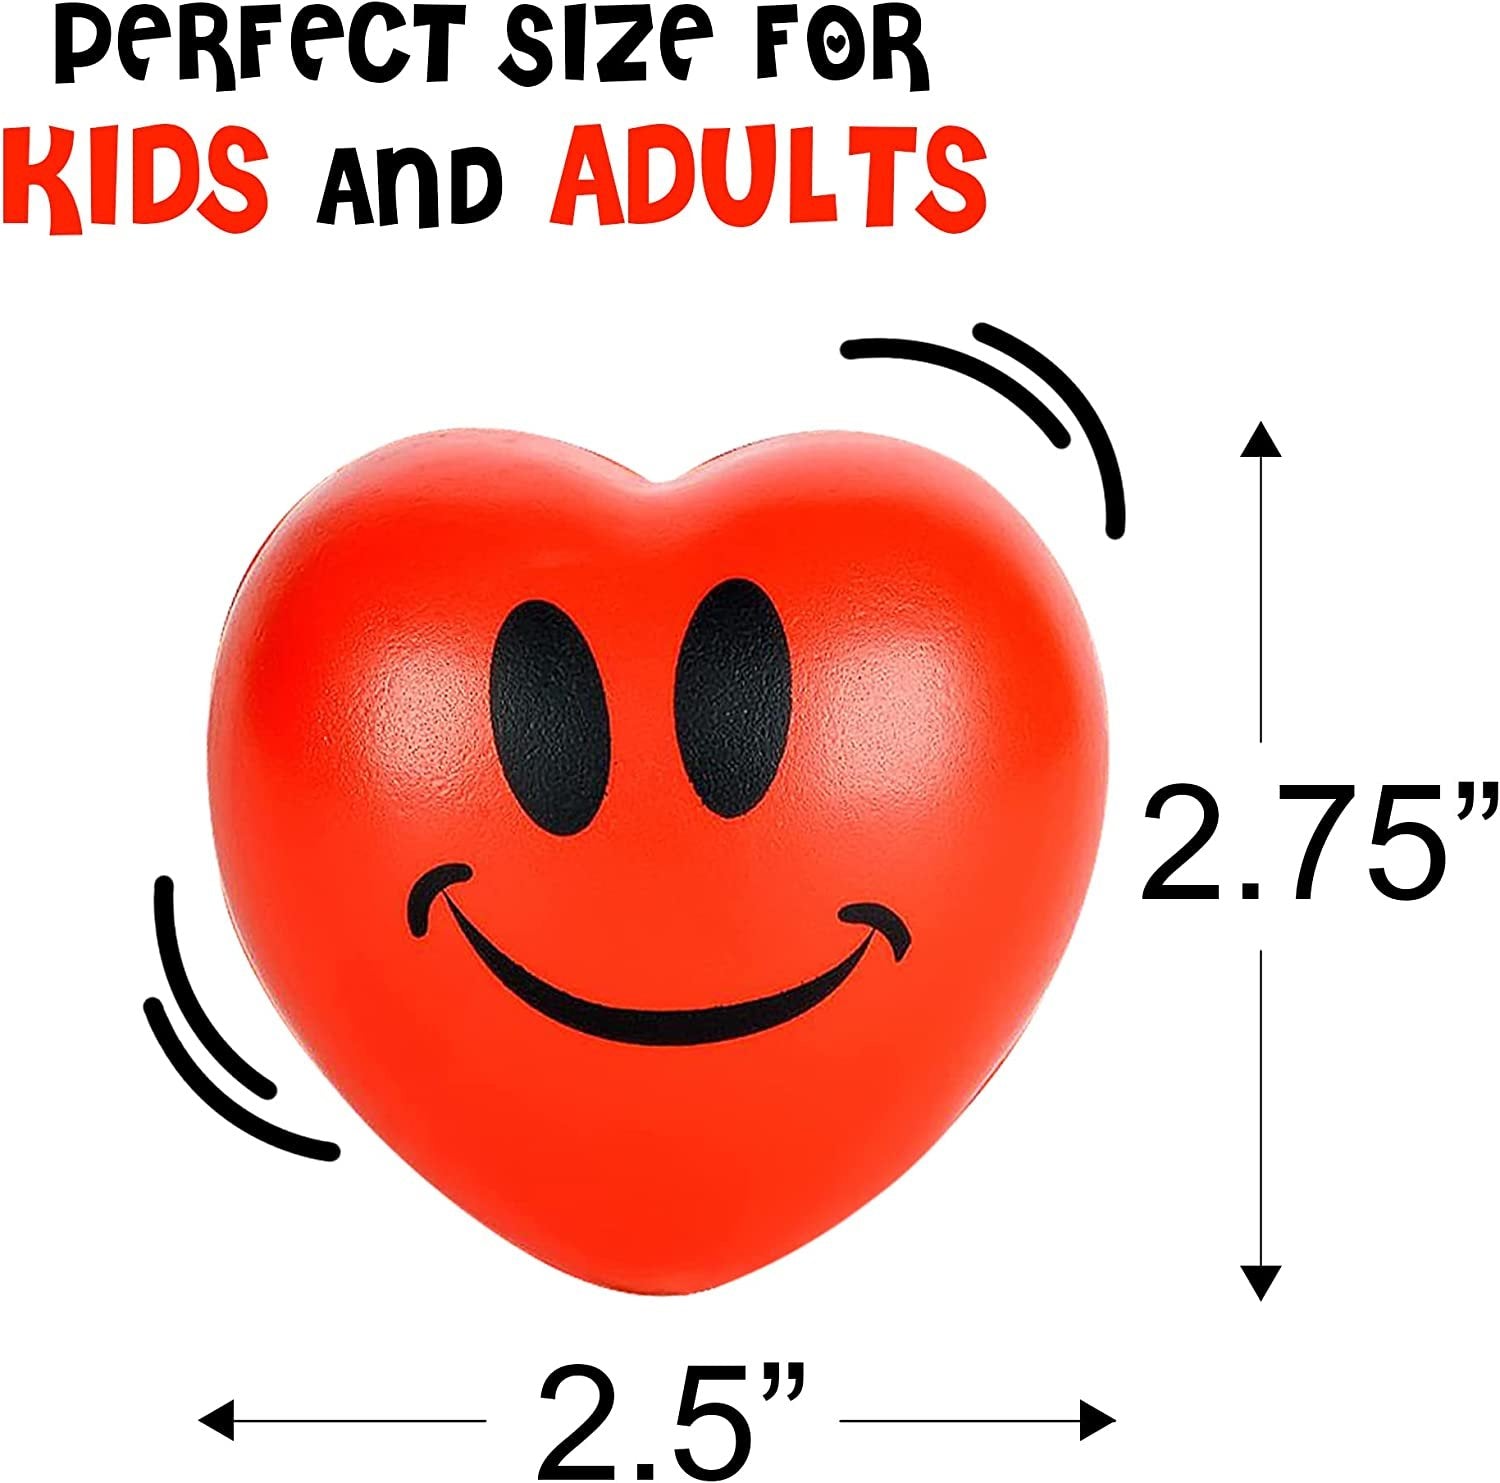 Valentines Heart Shaped Stress Balls - 12-Pack of 2.75" Squishy Heart Fidget Toys for Stress Relief, Heart Shaped Gifts for Adults & Kids, Smile Face Design, Cute Goodie Bag Fillers